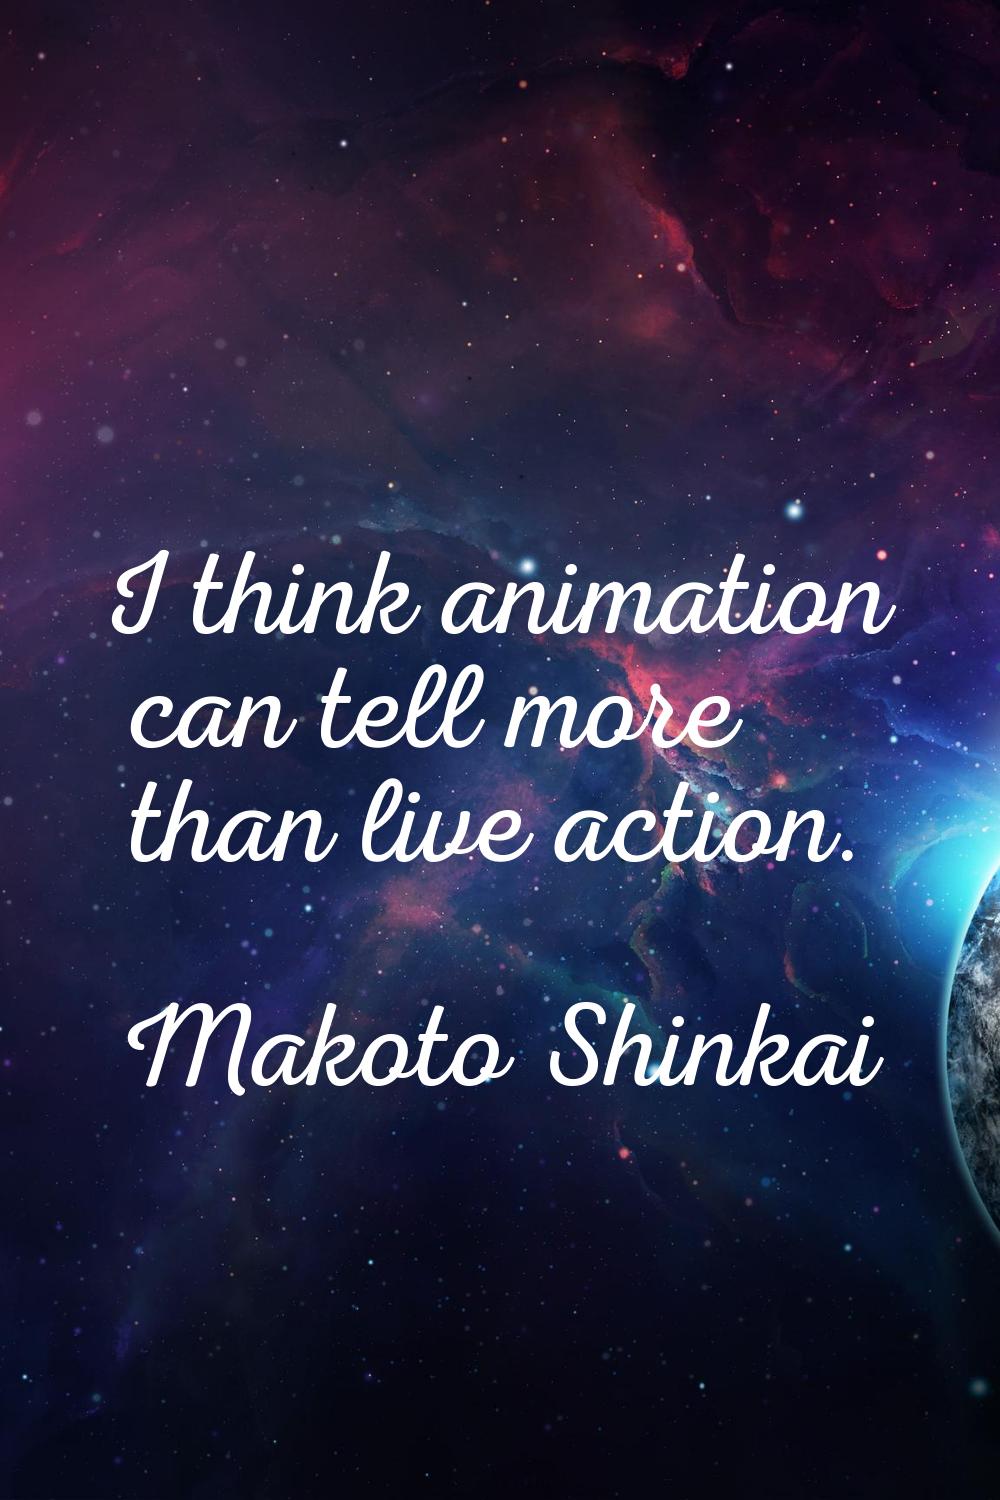 I think animation can tell more than live action.